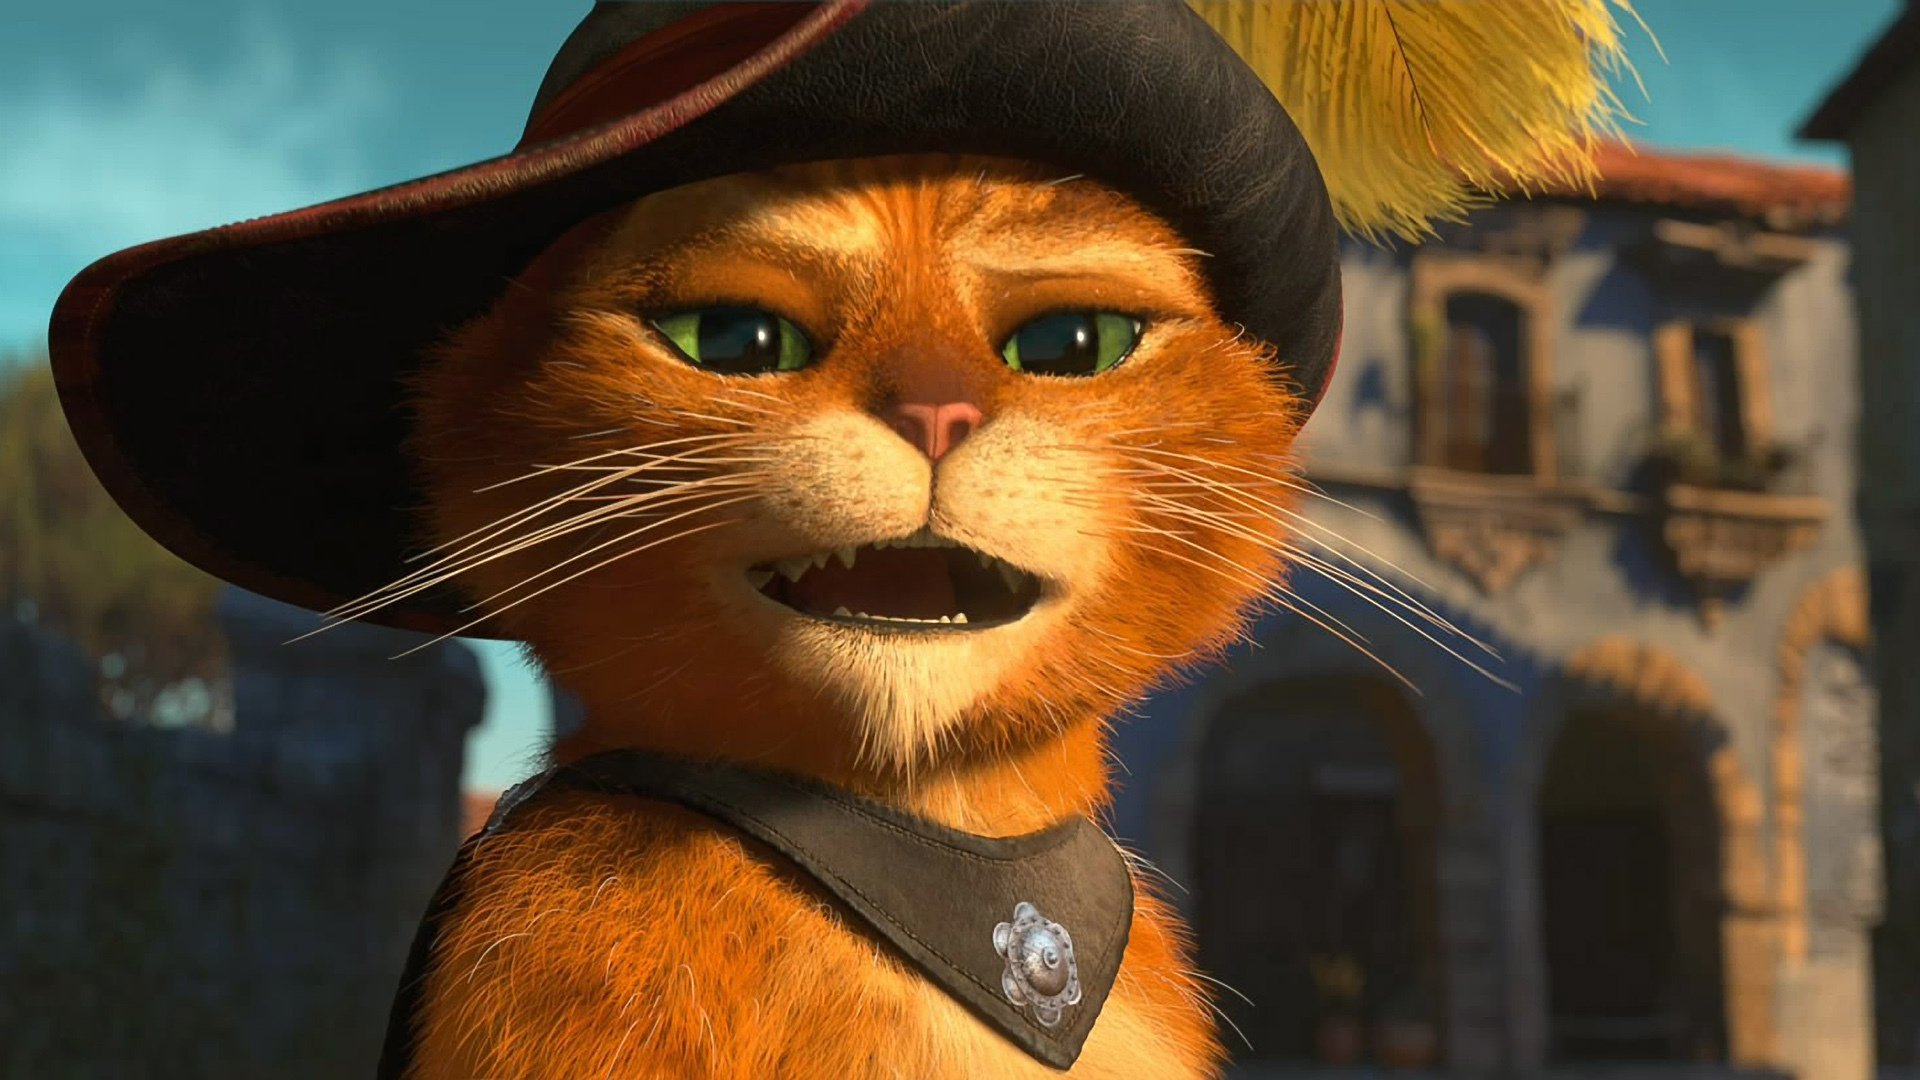 Puss in Boots Voiced By Antonio Banderas HD Wallpaper Background